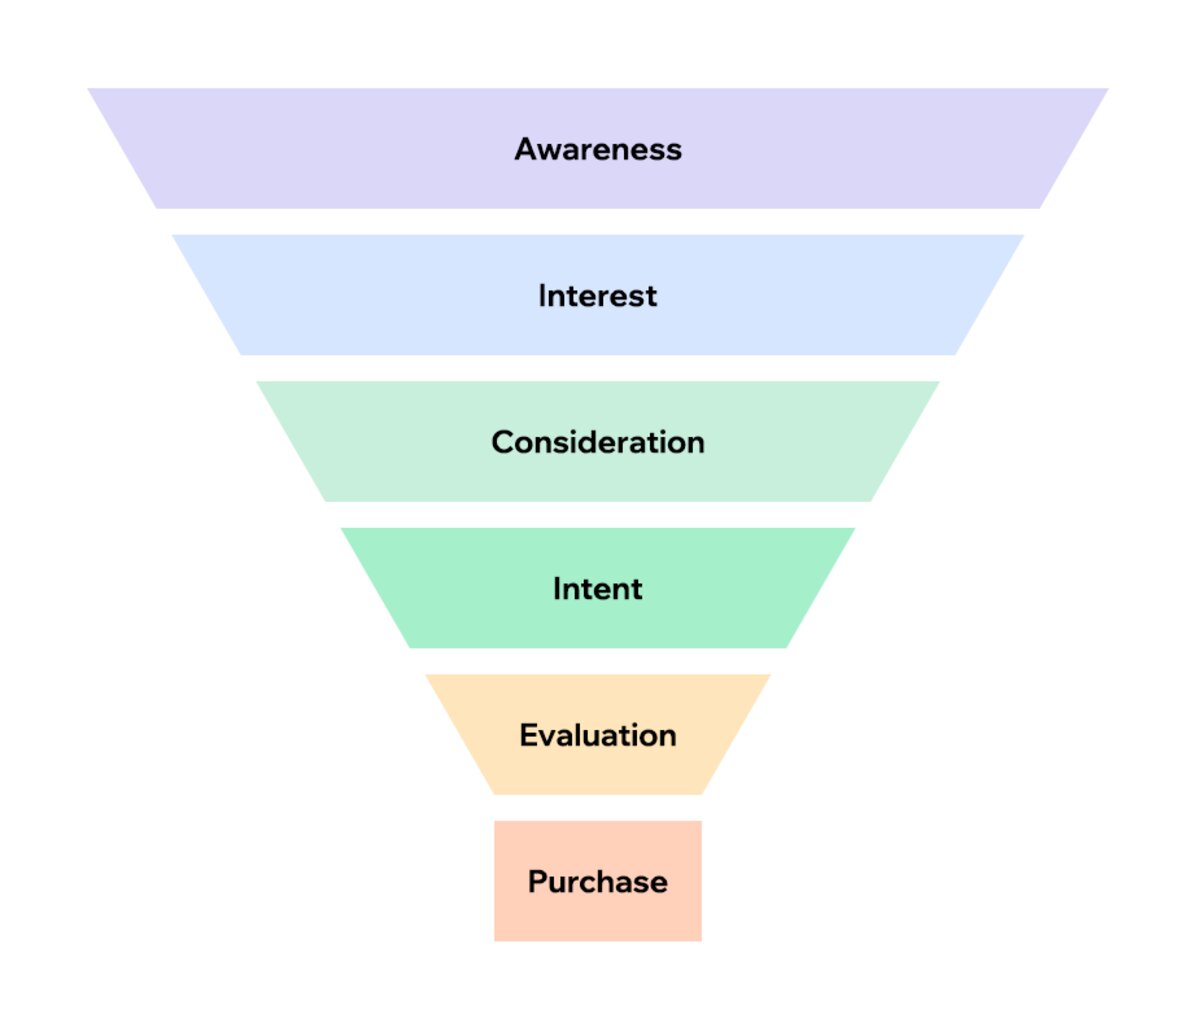 Image of a sales funnel breakdown. The steps of a sales funnel are listed in coloured bars. Starting from the top down, the steps read: Awareness, Interest, Consideration, Intent, Evaluation, Purchase.